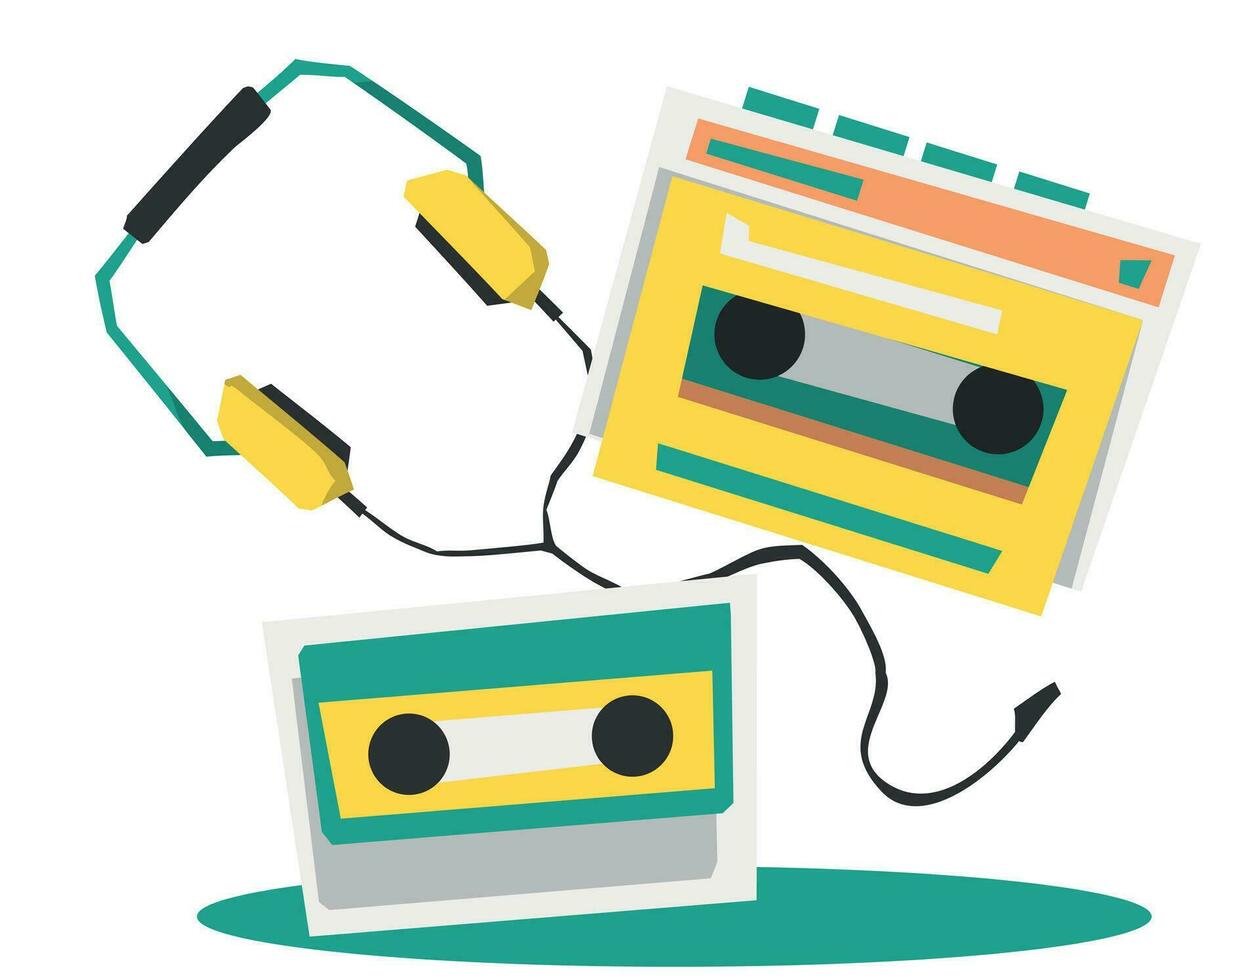 80s 90s portable player set, simple design, cassette, player, headphones in flat style, on white background vector